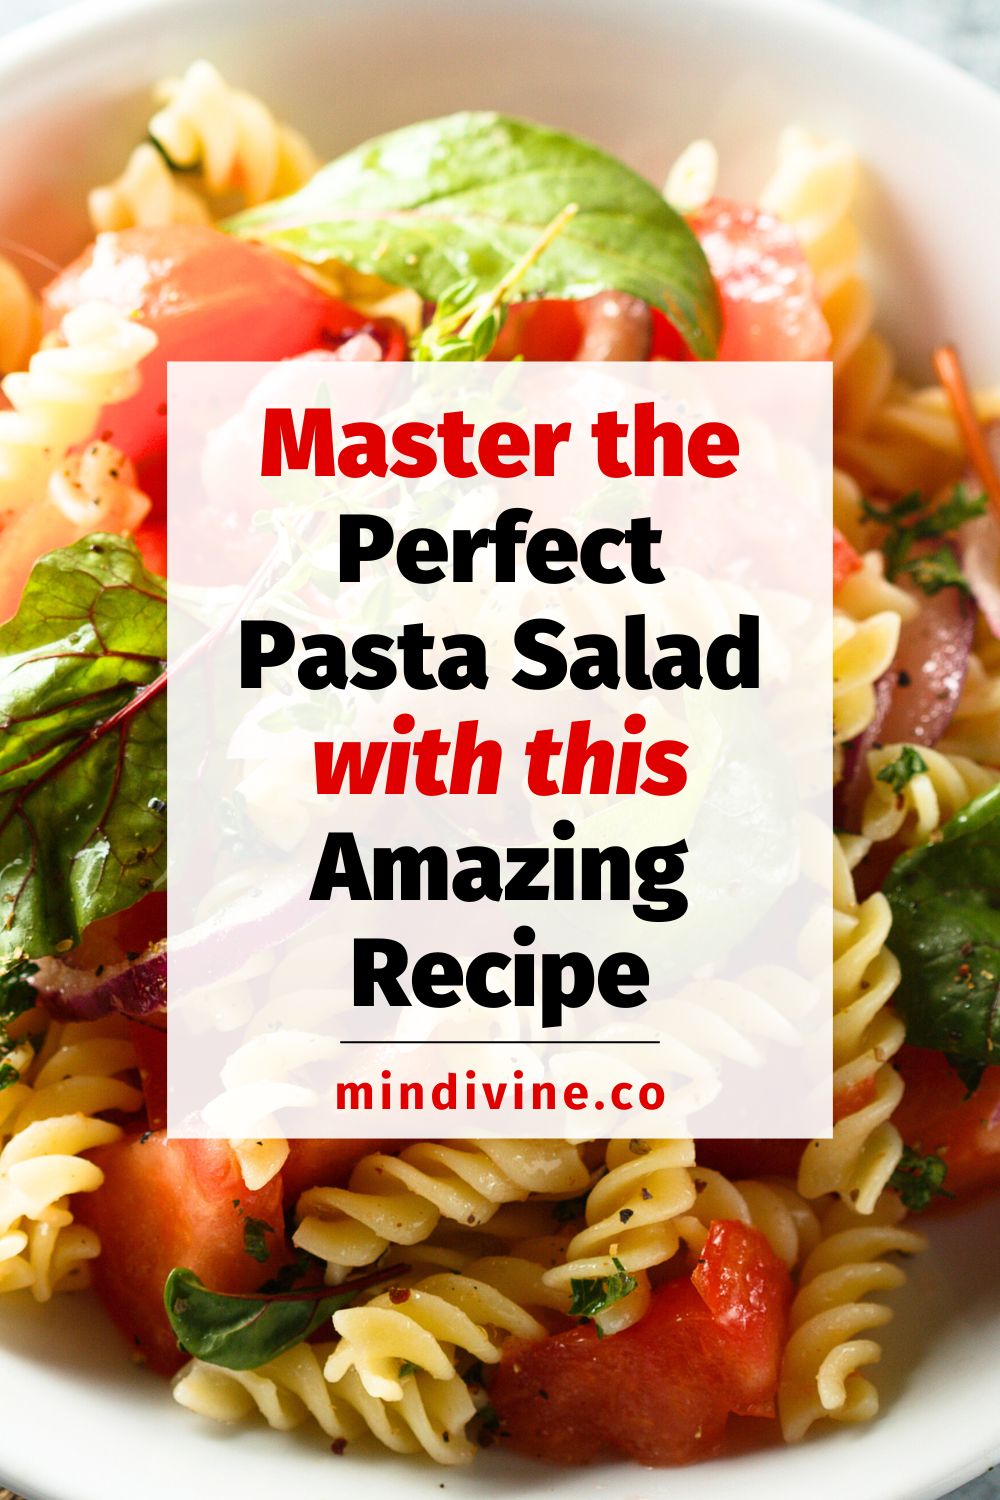 Perfect pasta salad with vegetables and other ingredients